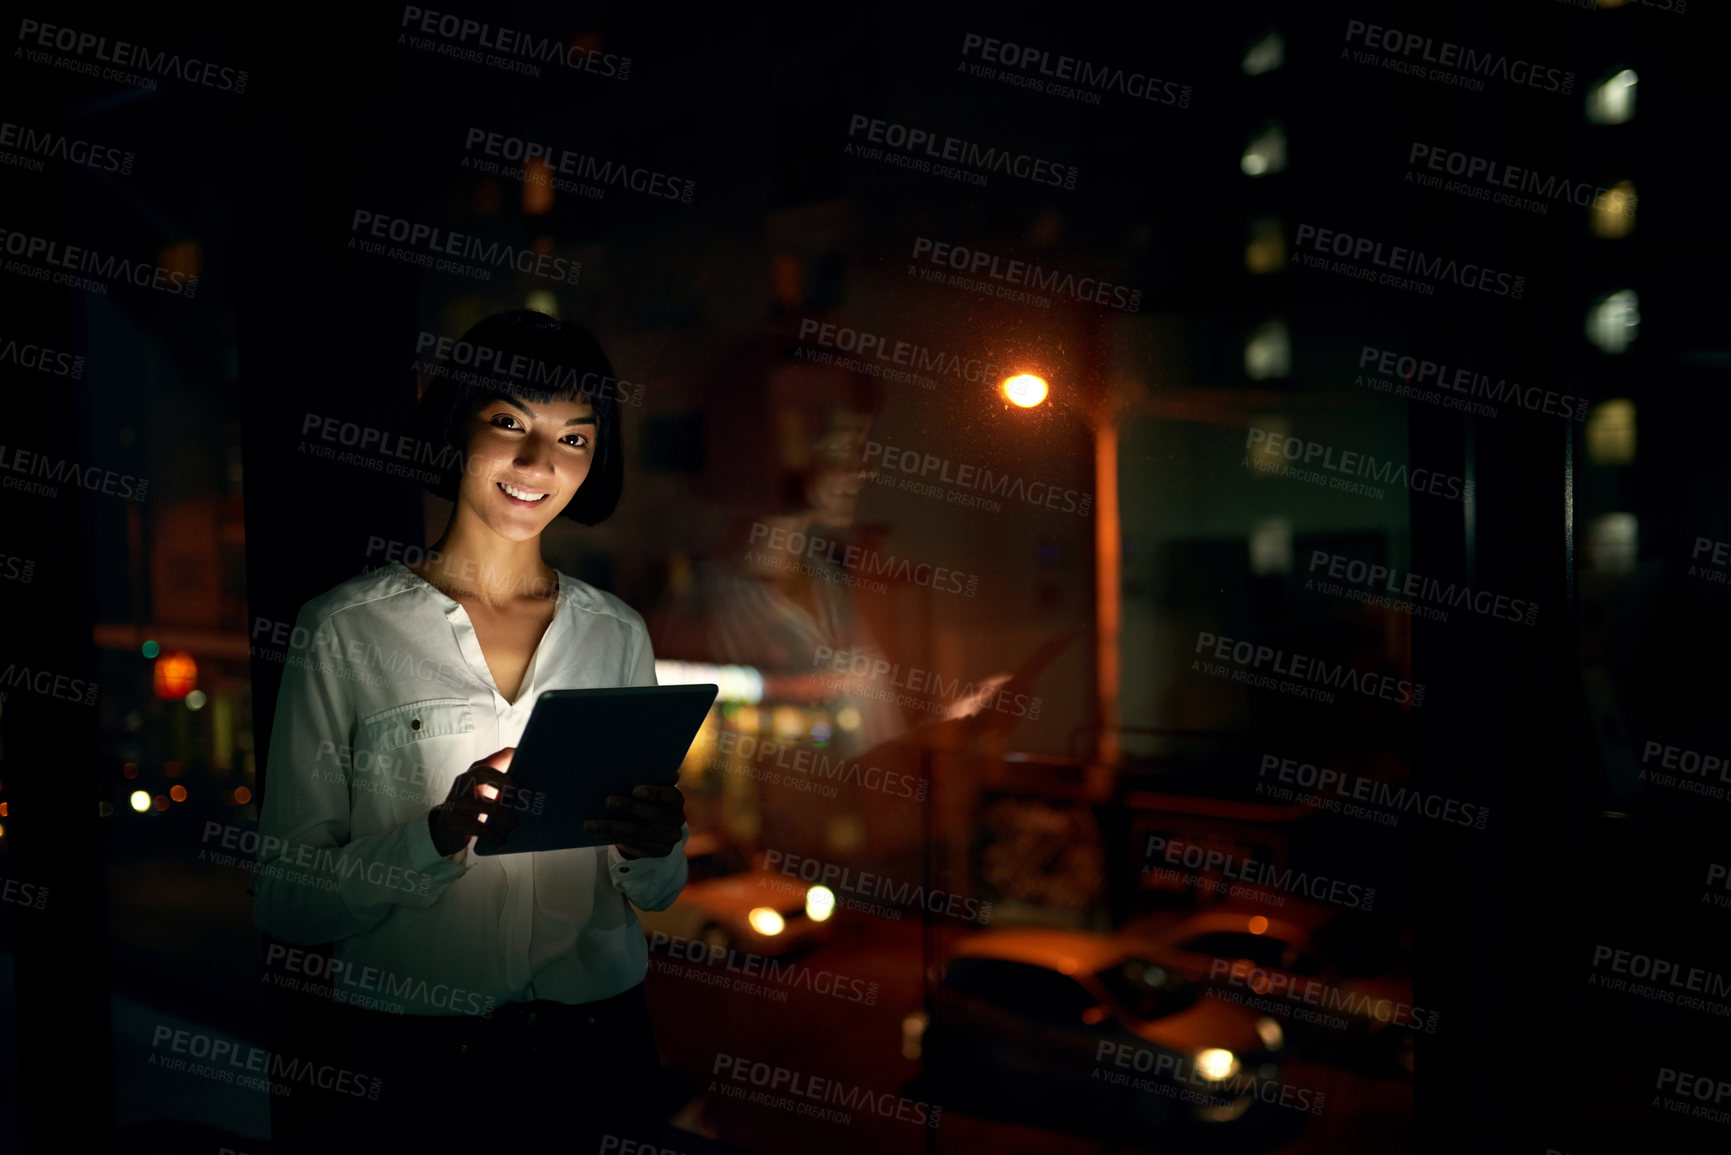 Buy stock photo Shot of an attractive young woman using a digital tablet outside in the city at night